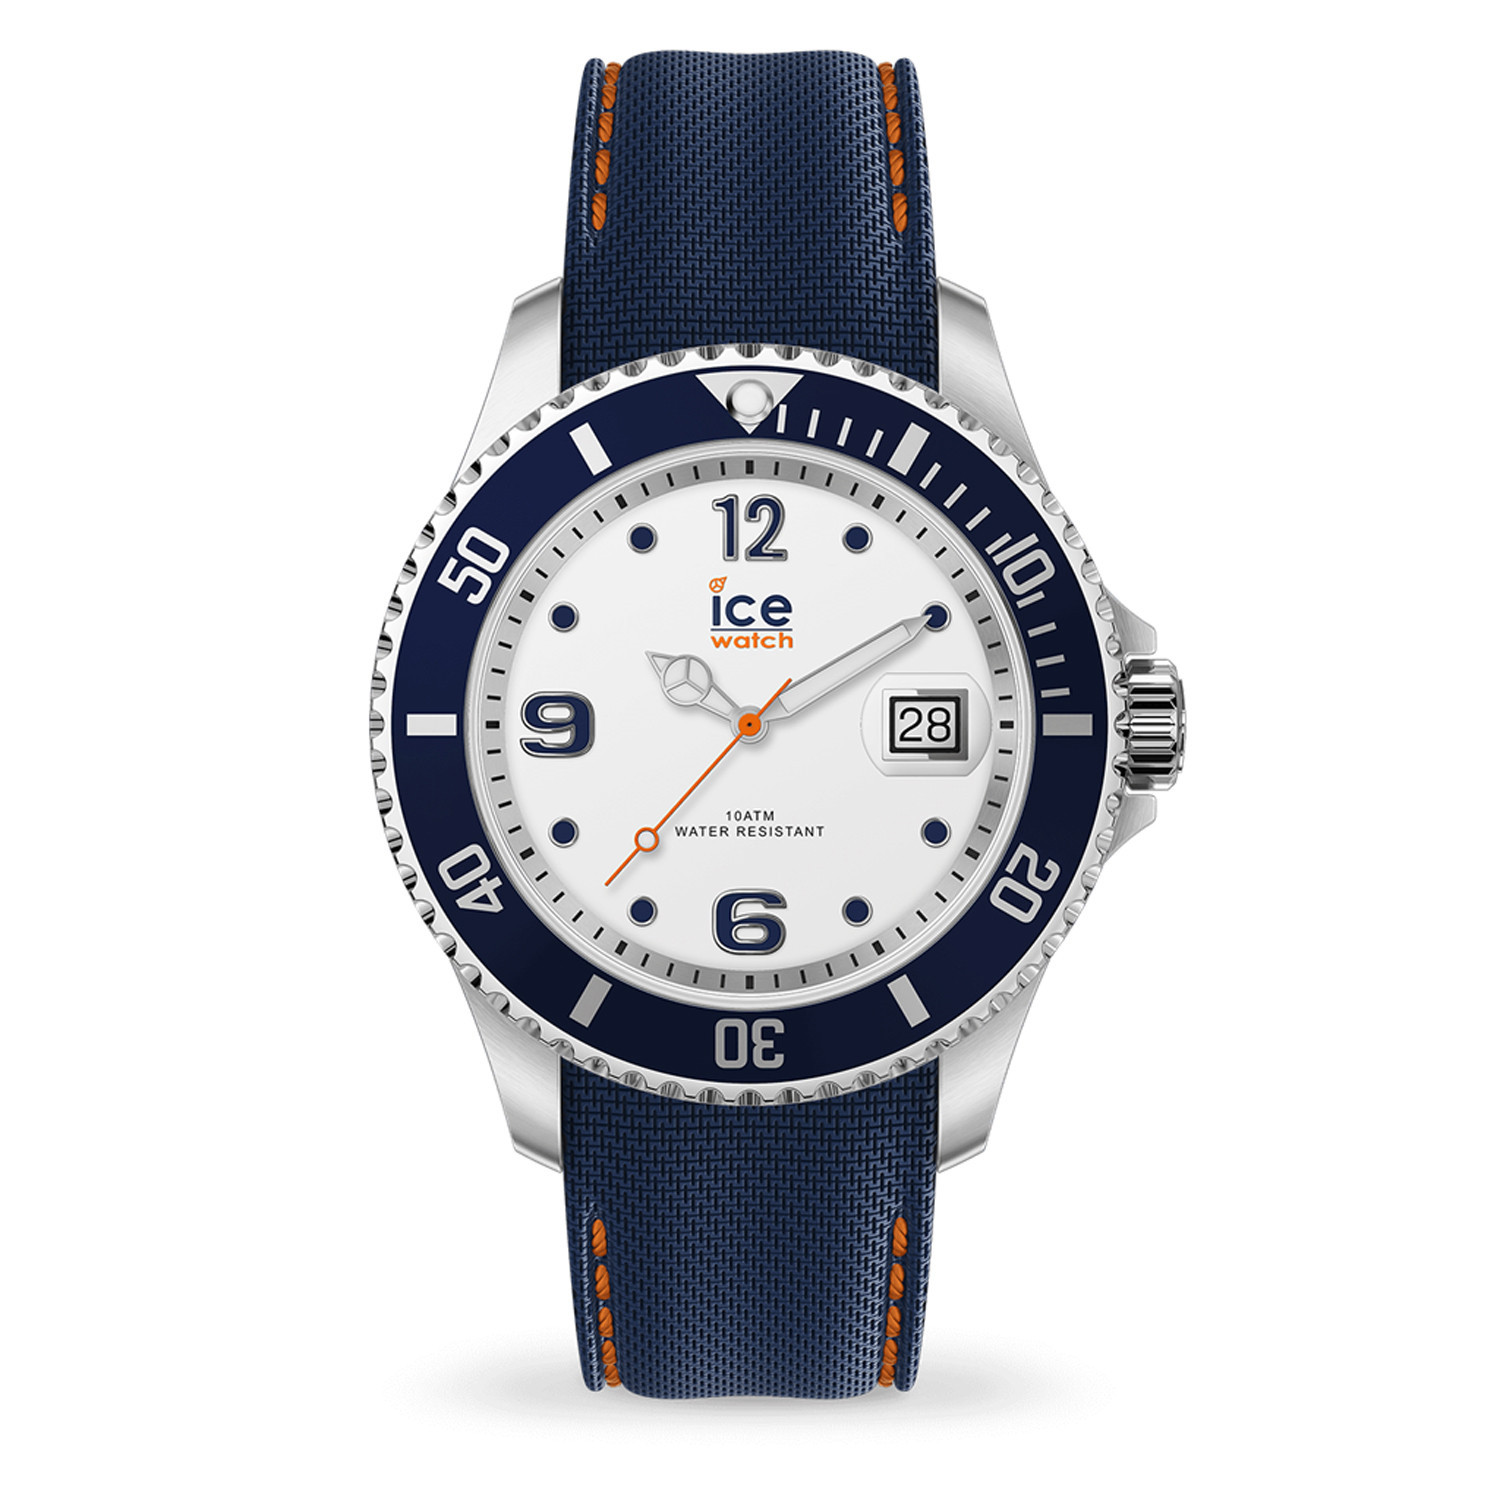 Montre Ice Watch White blue large